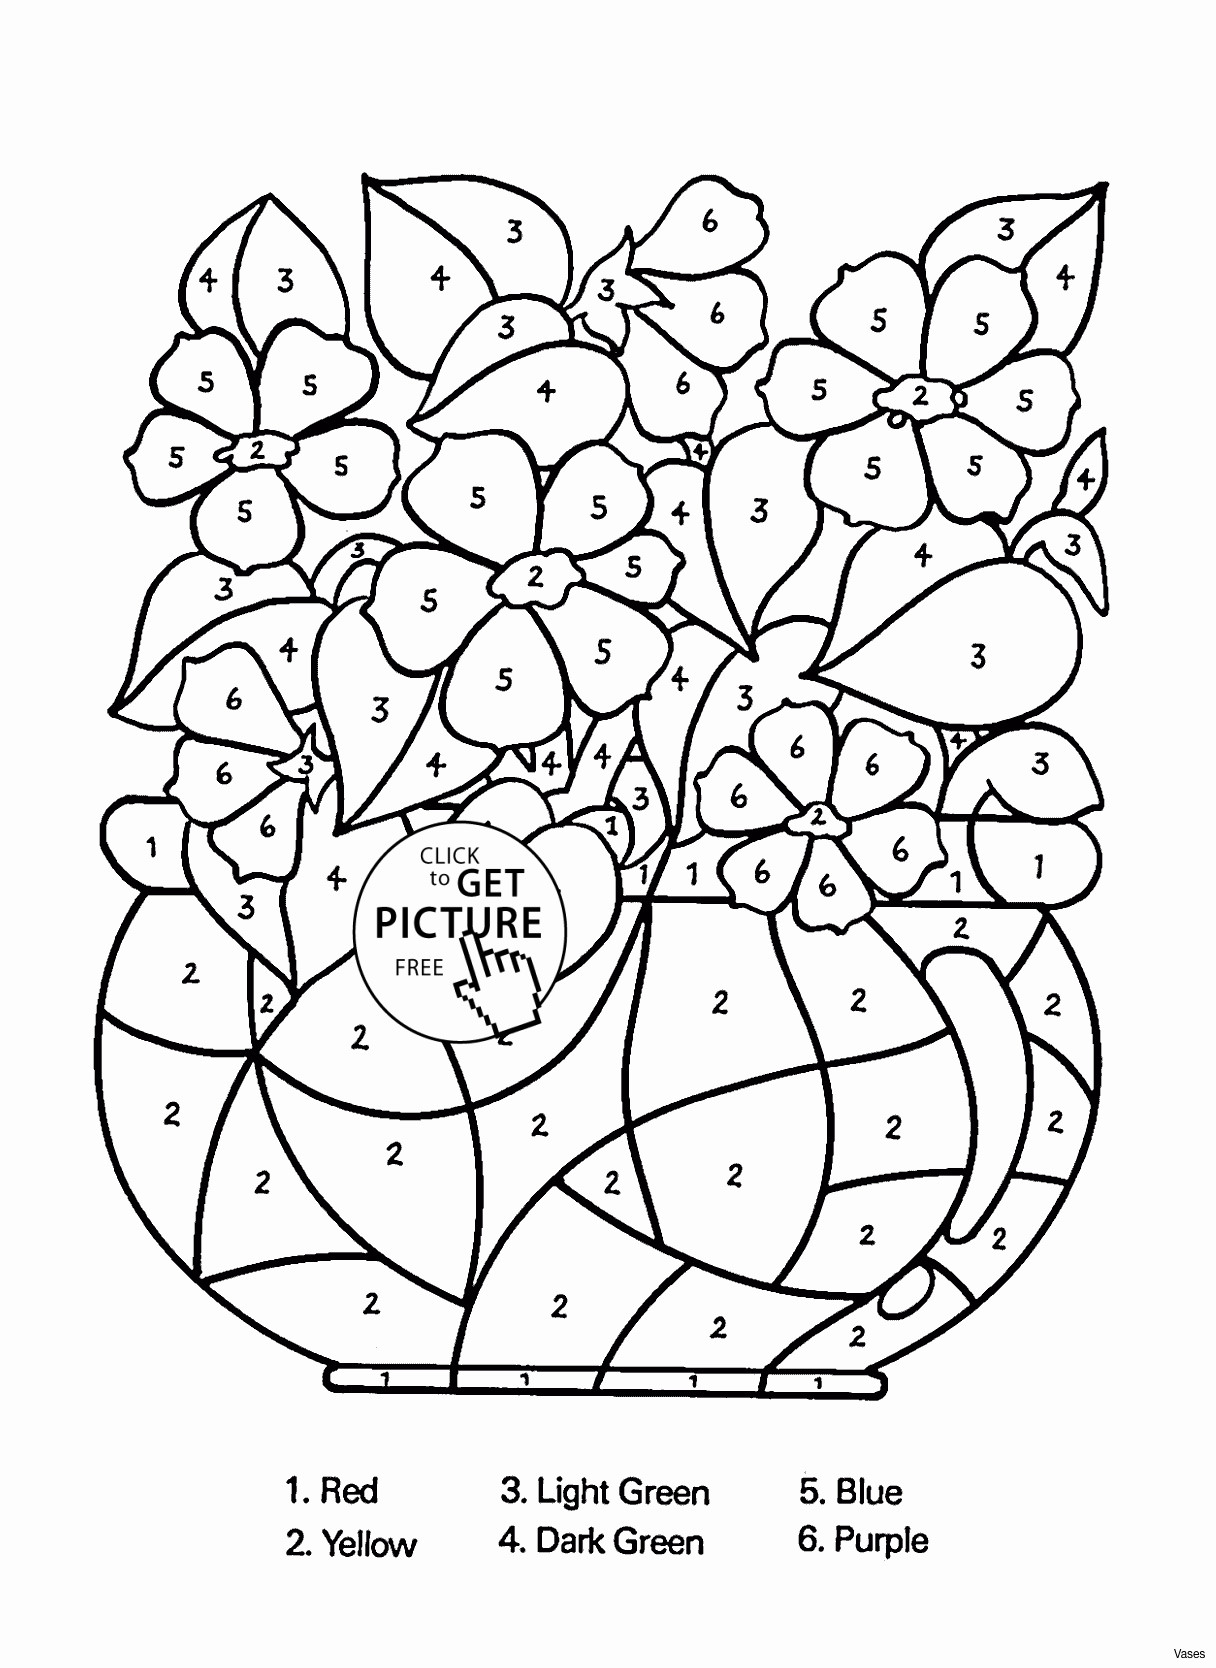 30 Popular Vase Floral Designs 2024 free download vase floral designs of vases flower vase coloring page pages flowers in a top i 0d and free inside vases flower vase coloring page pages flowers in a top i 0d and free